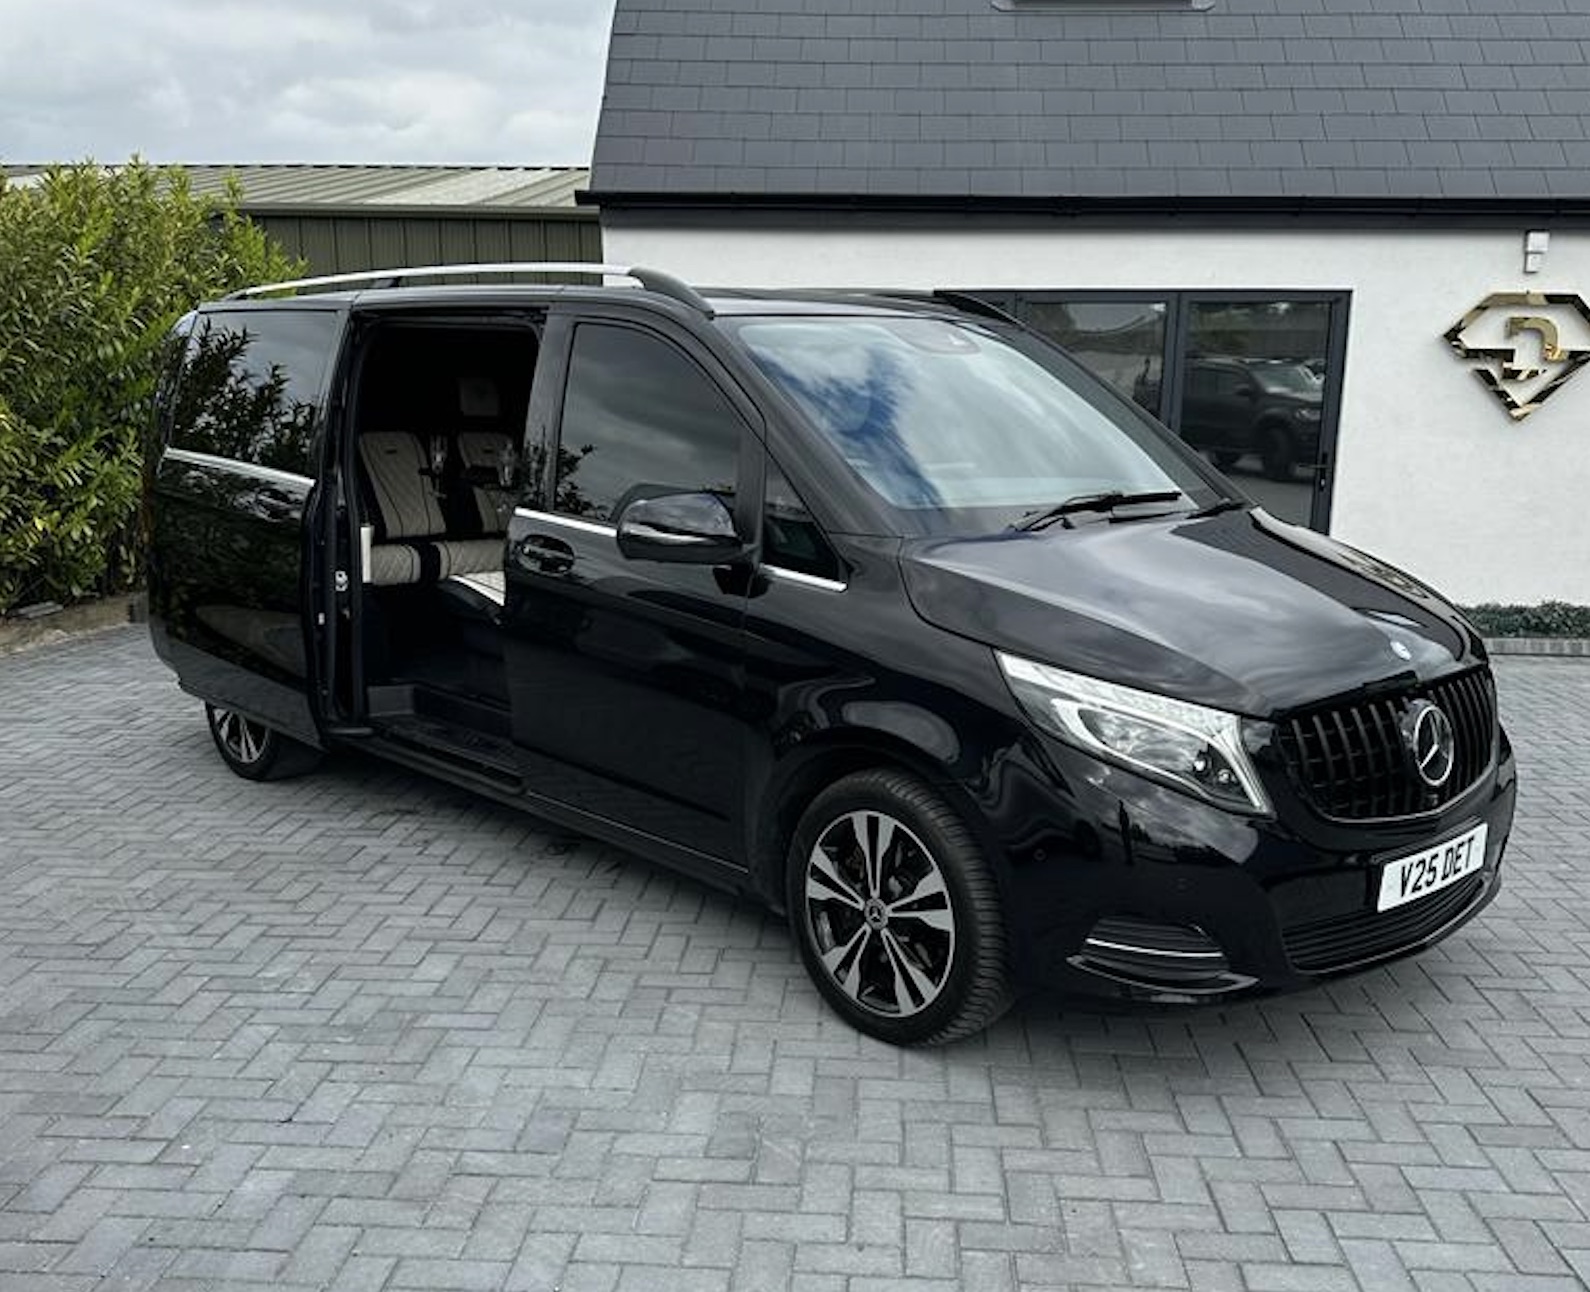 Mercedes V-Class Hire for Proms: An Experience of Comfort and Luxury